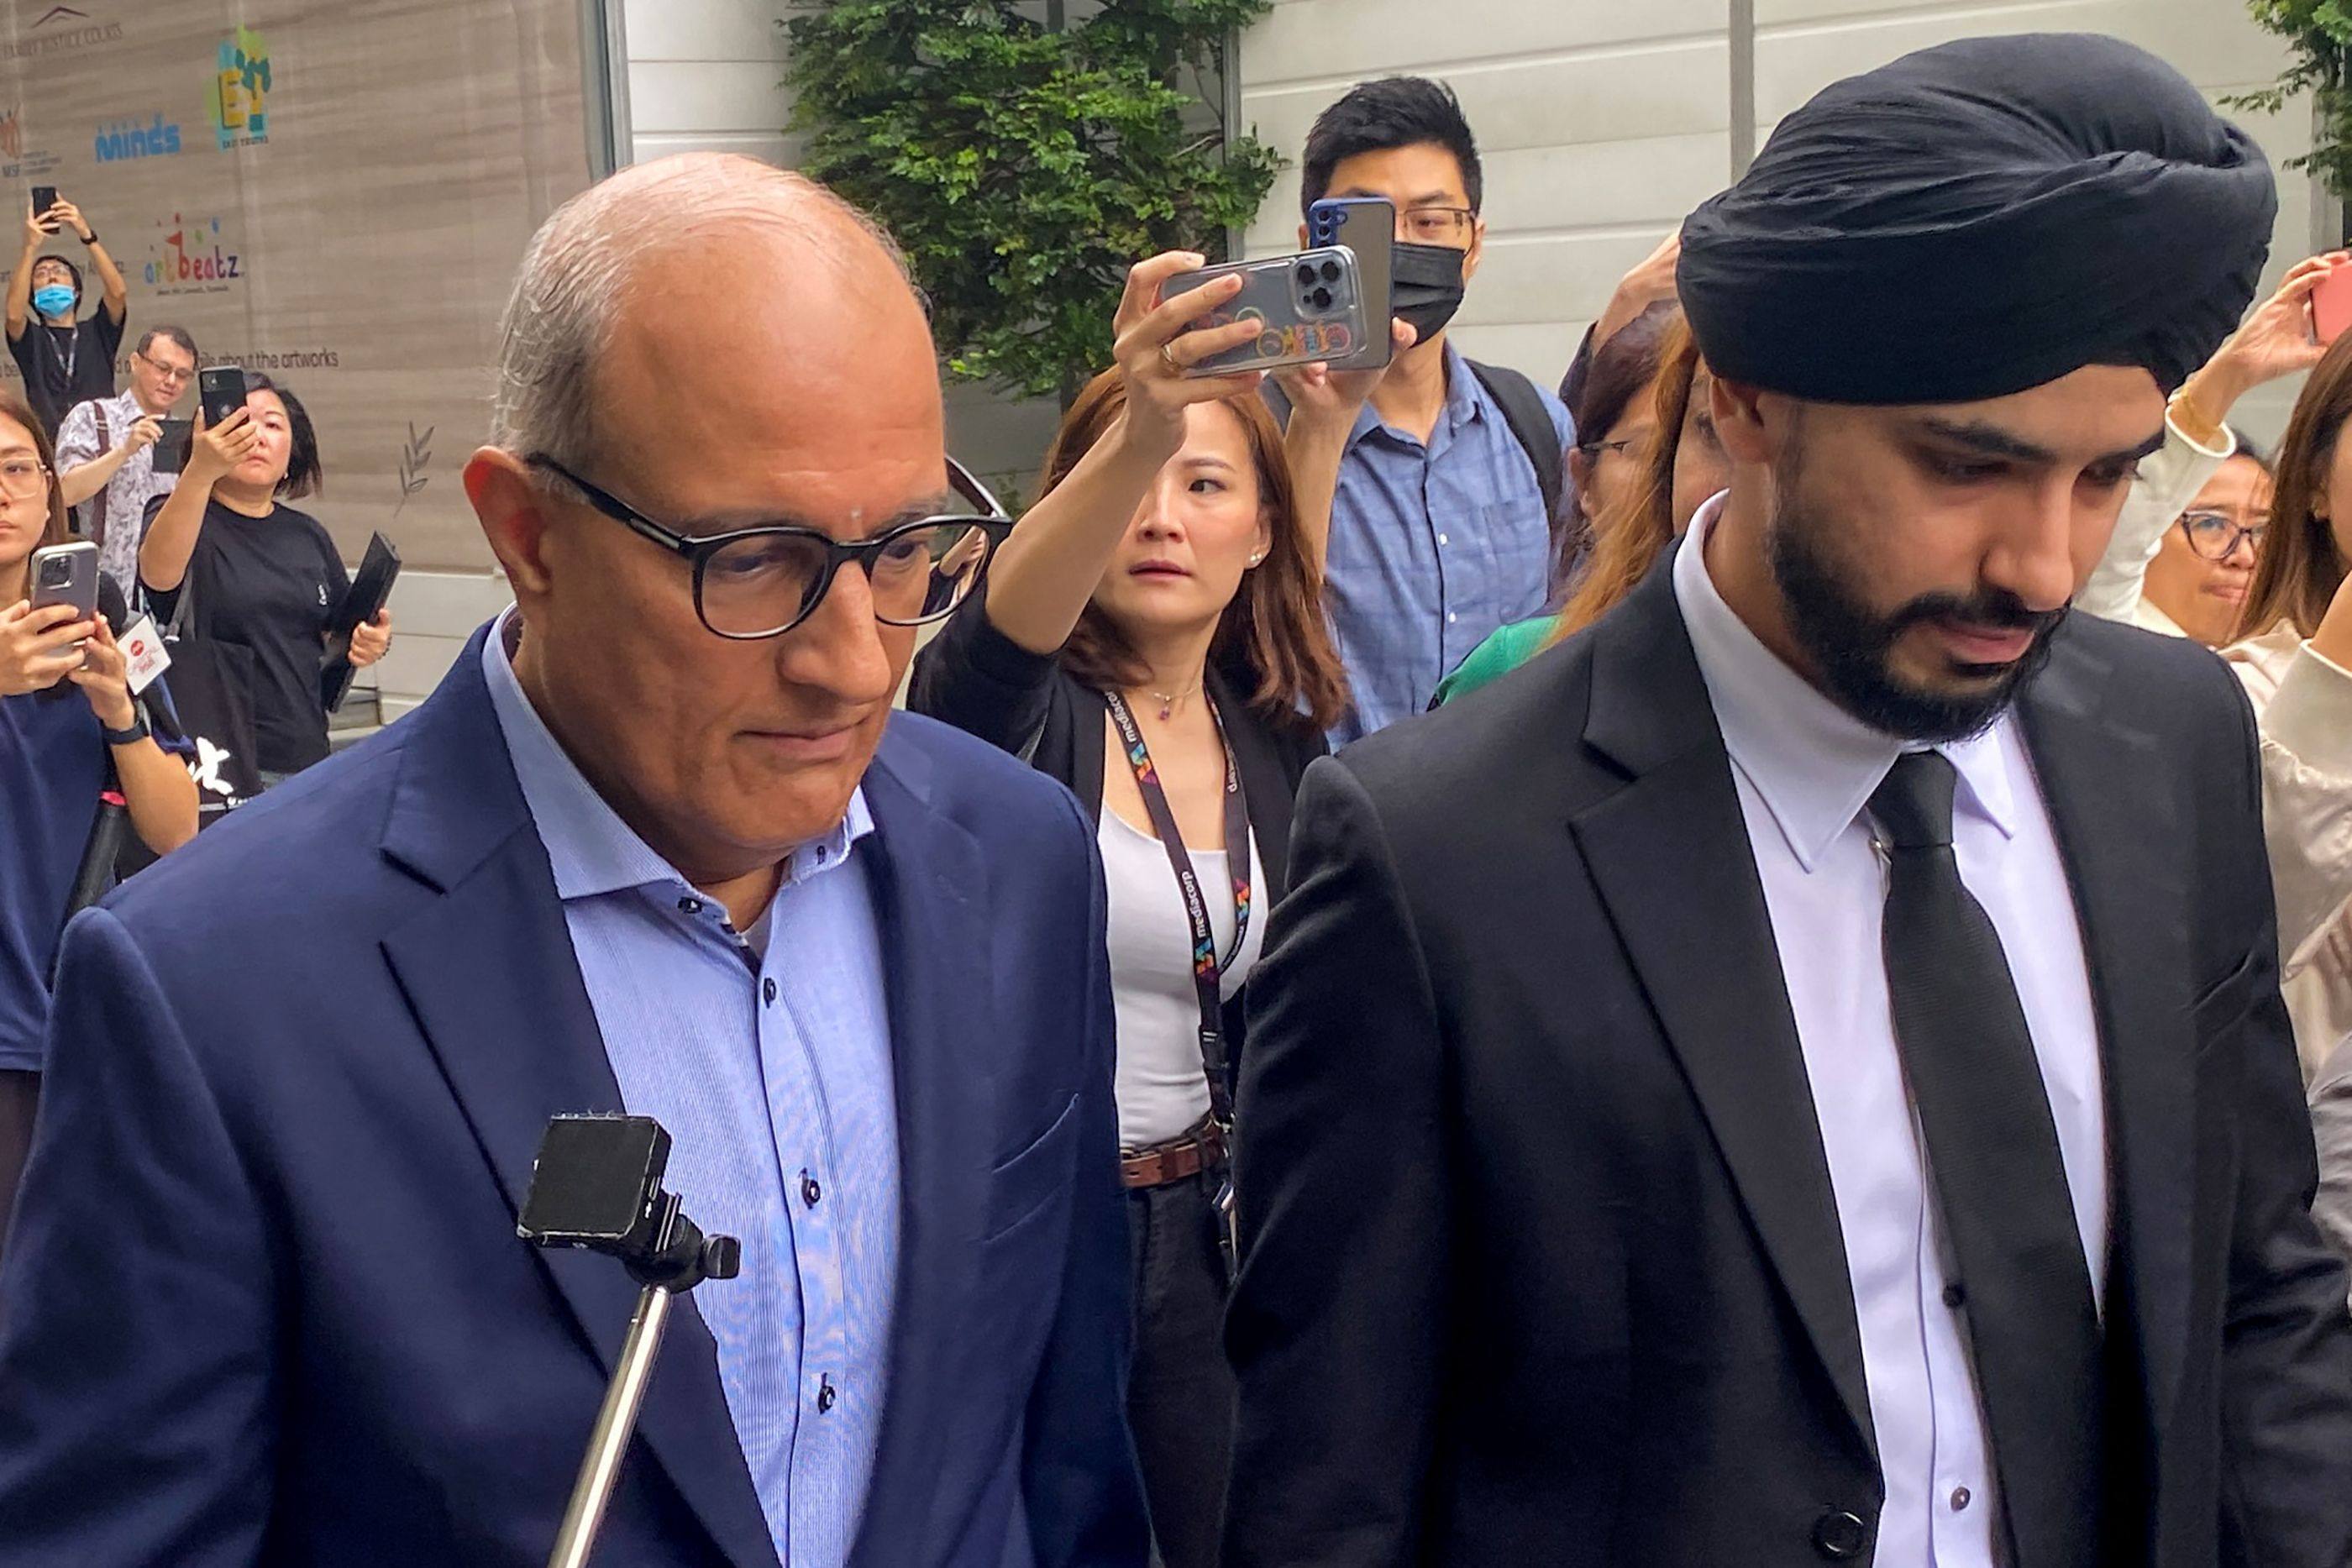 Singapore’s Minister for Transport and Minister-in-charge for Trade Relations S. Iswaran is charged with 27 offences in a corruption probe that has also ensnared a billionaire hotel tycoon. Photo: AFP